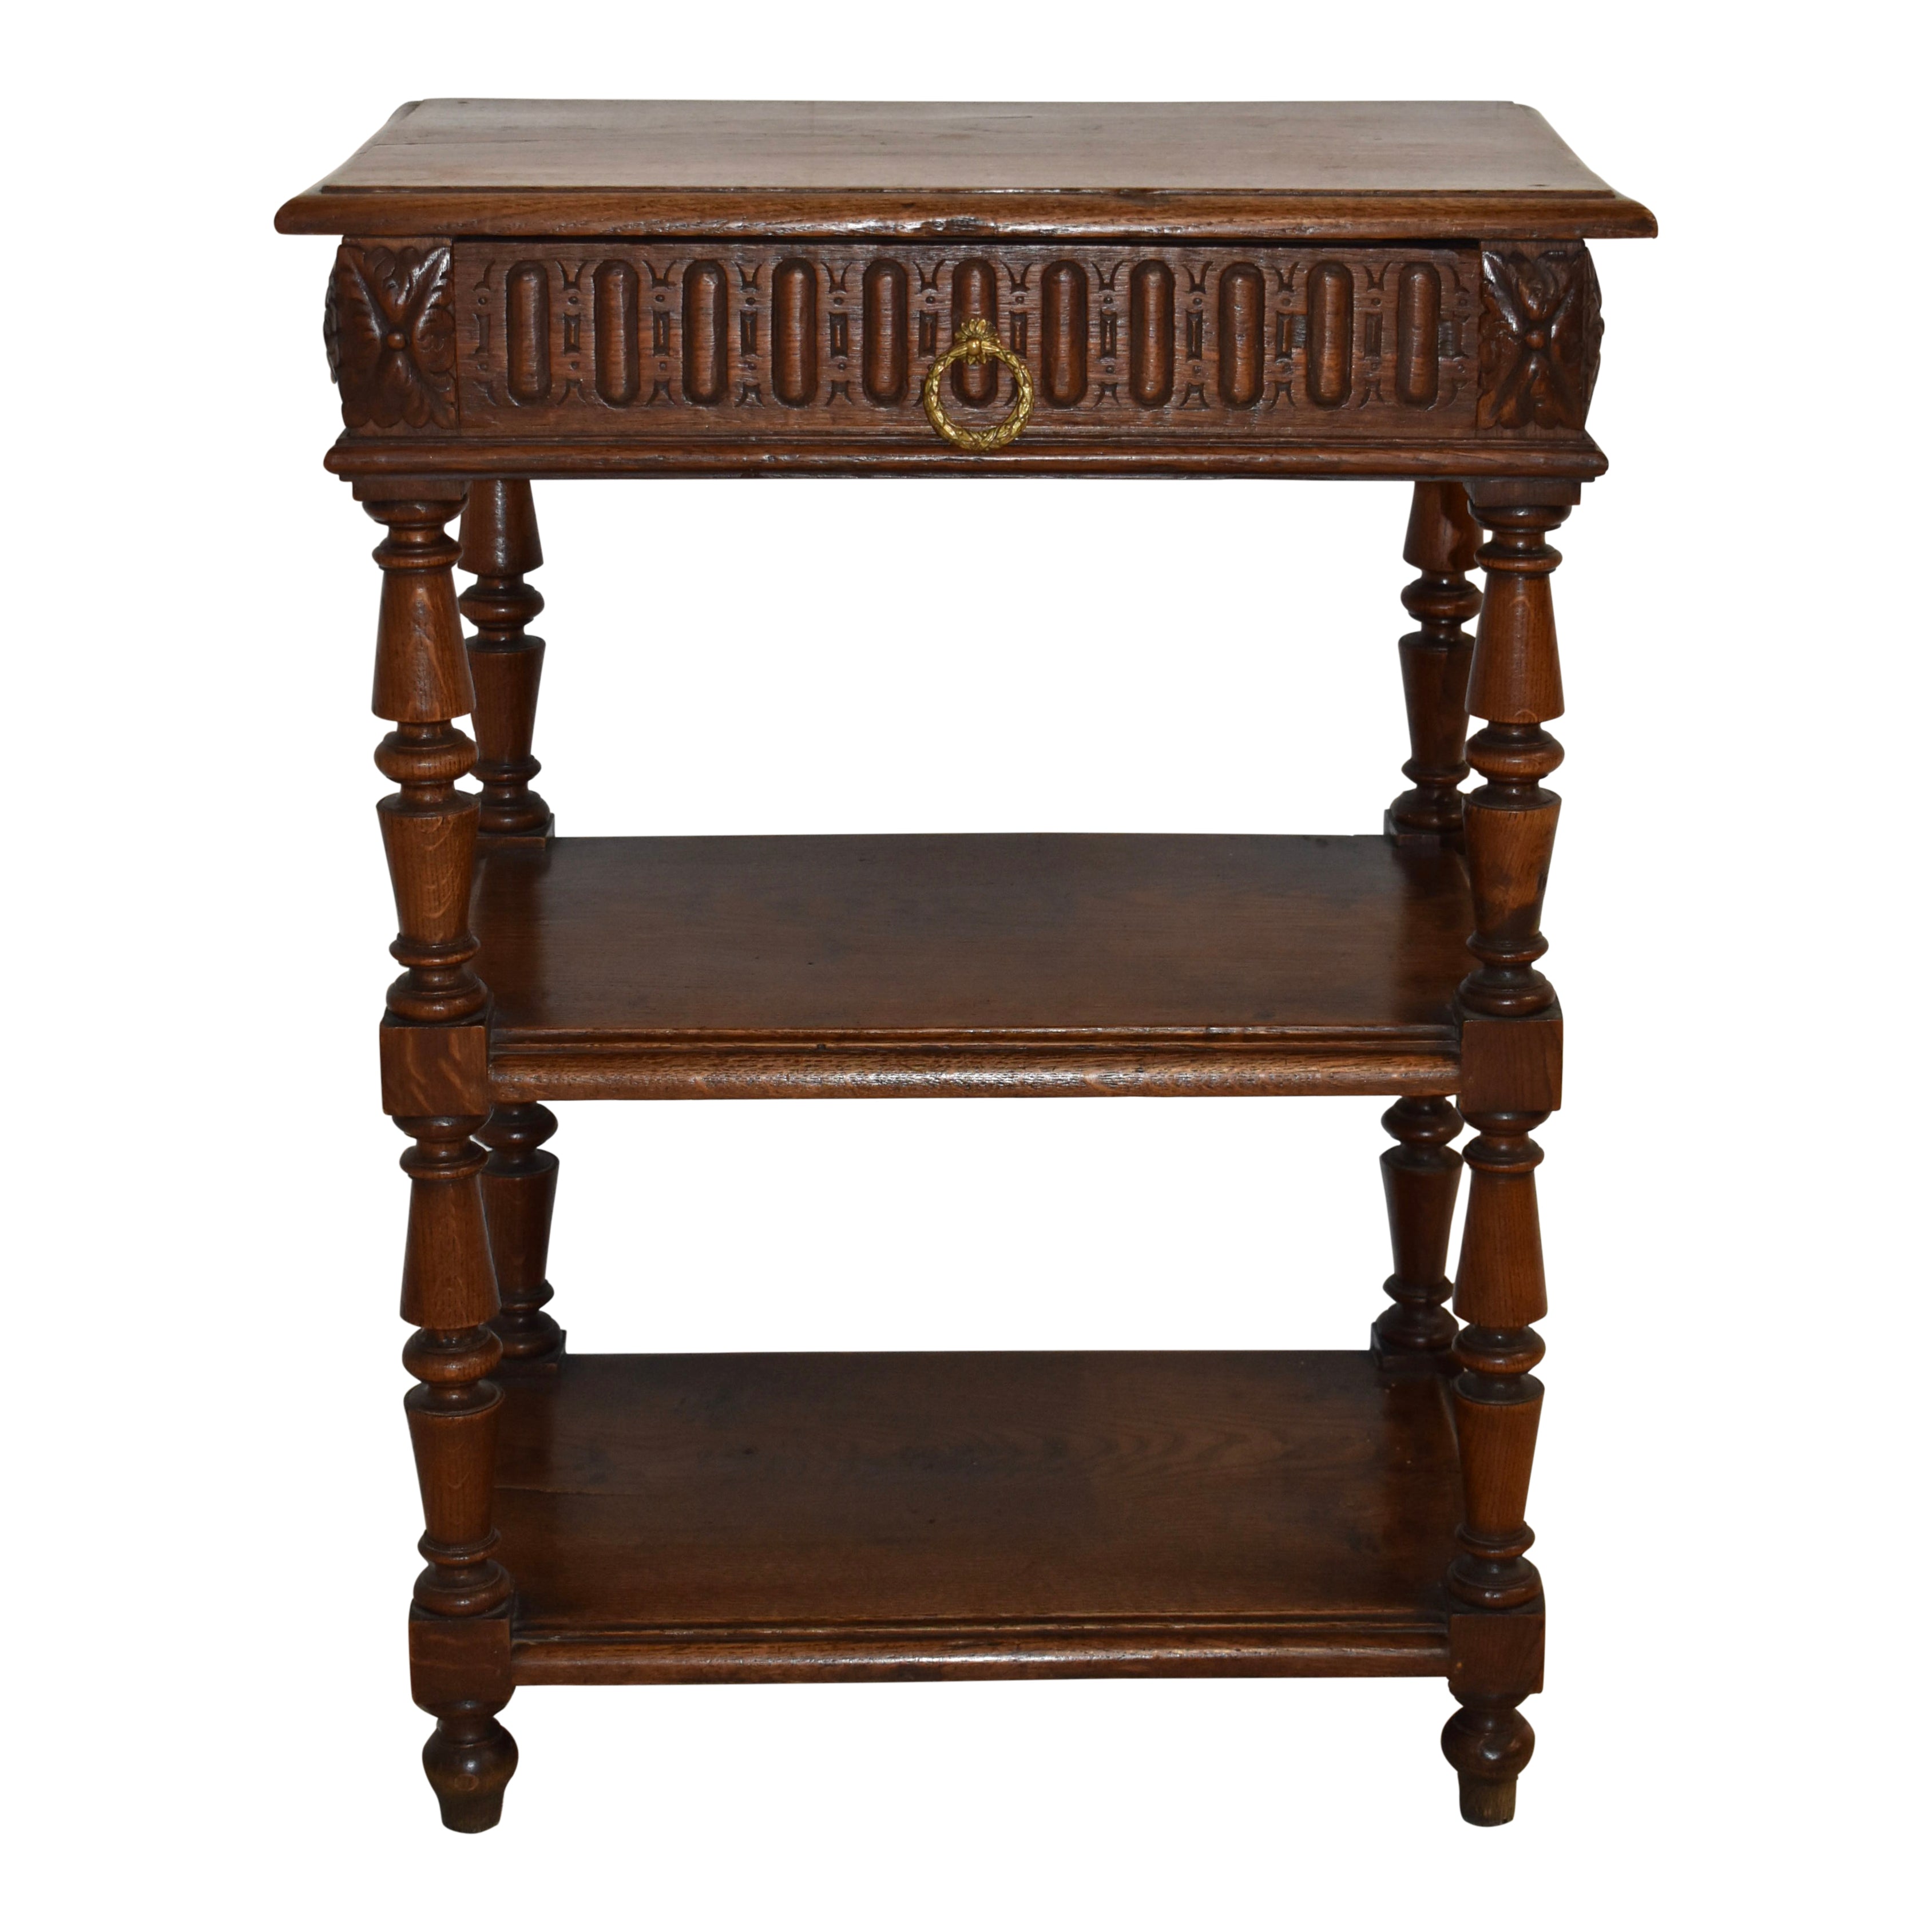 Carved Tiered Table